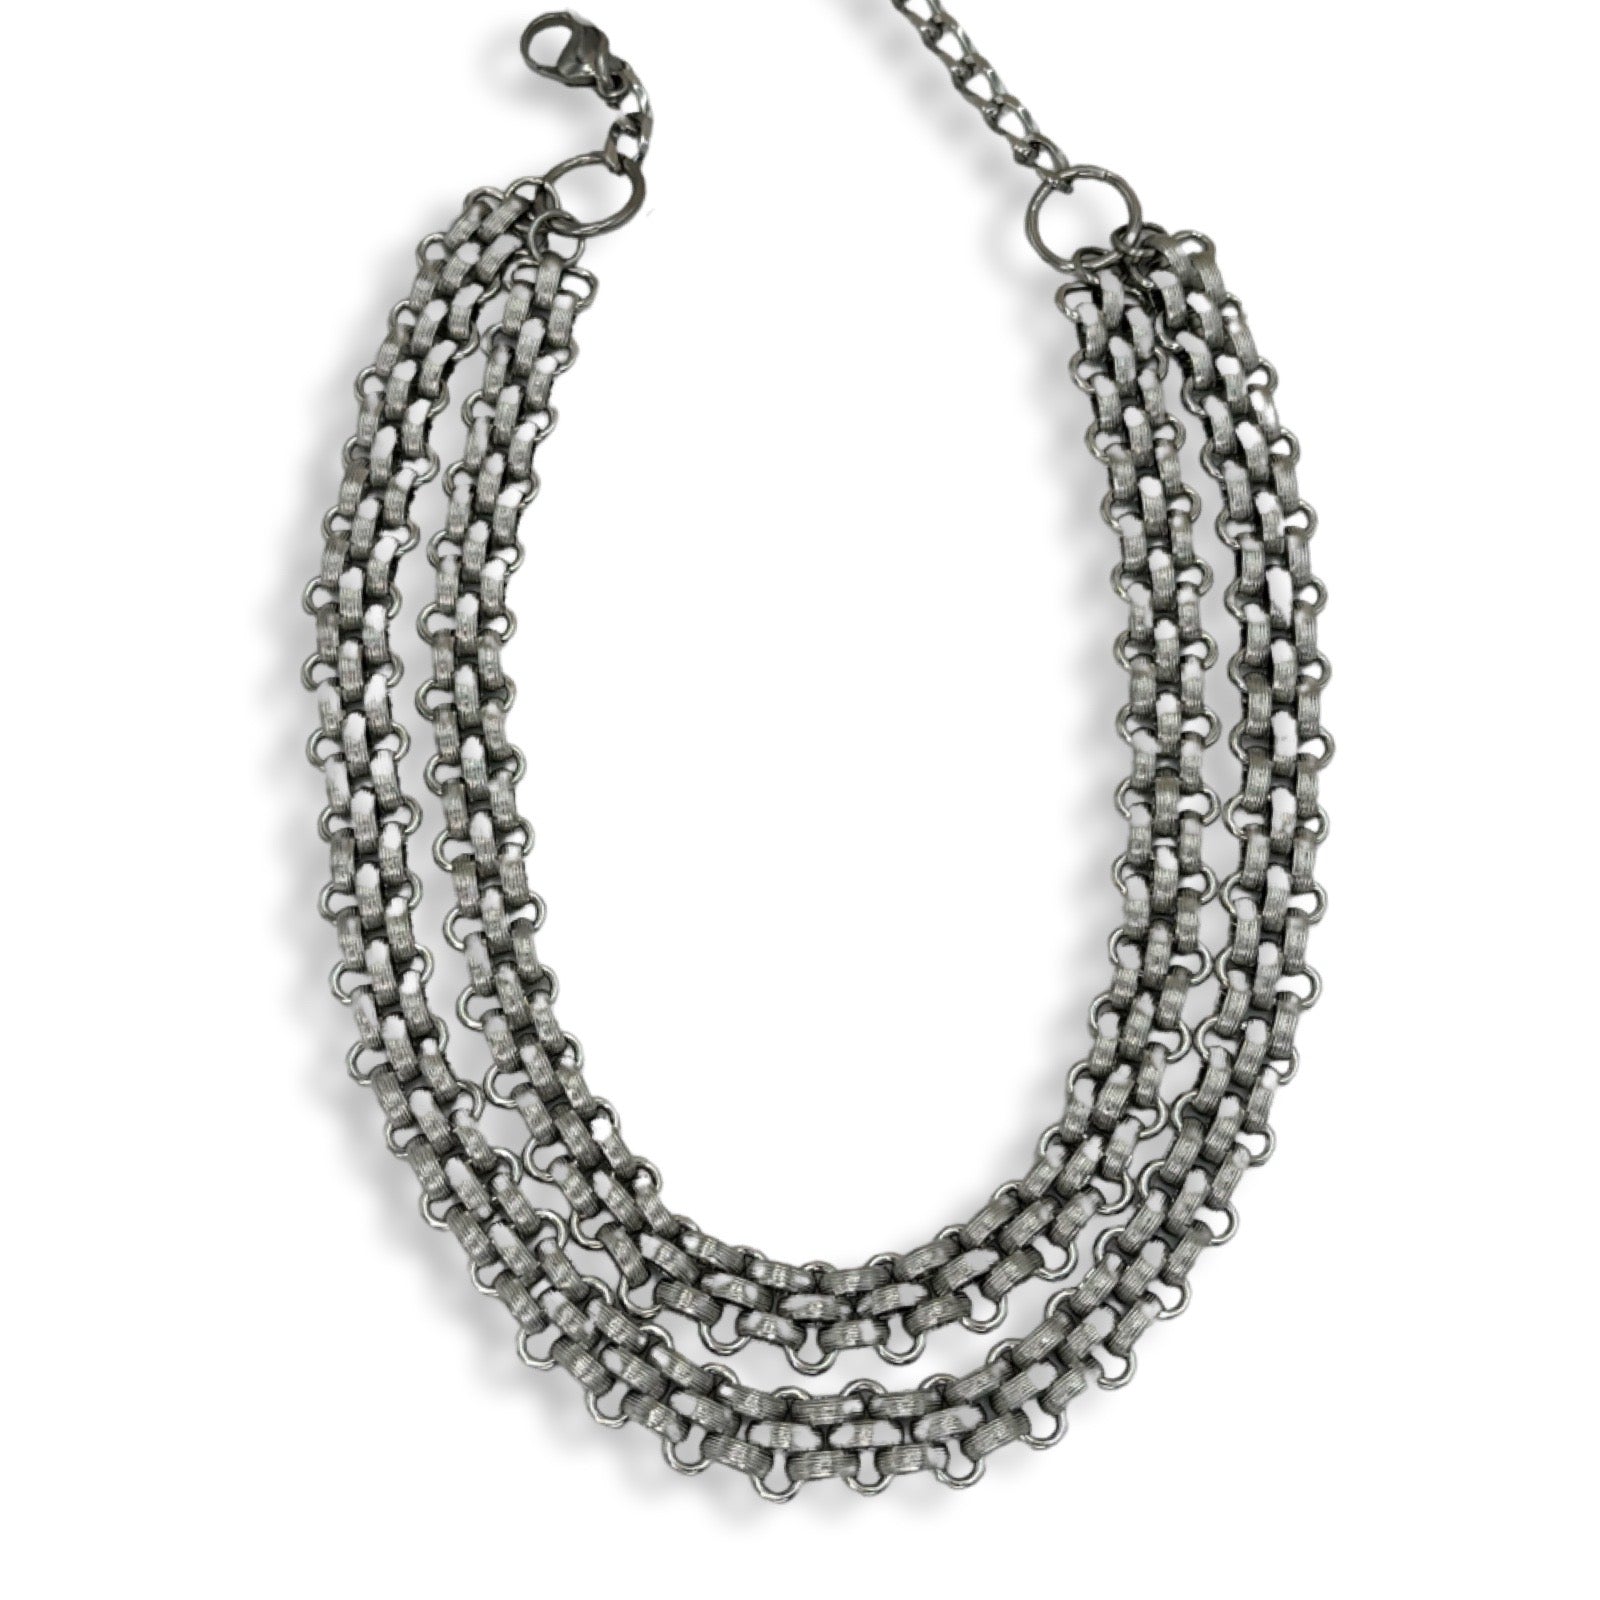 Sophia S&S Chain Necklace Necklaces Cerese D, Inc. Silver  